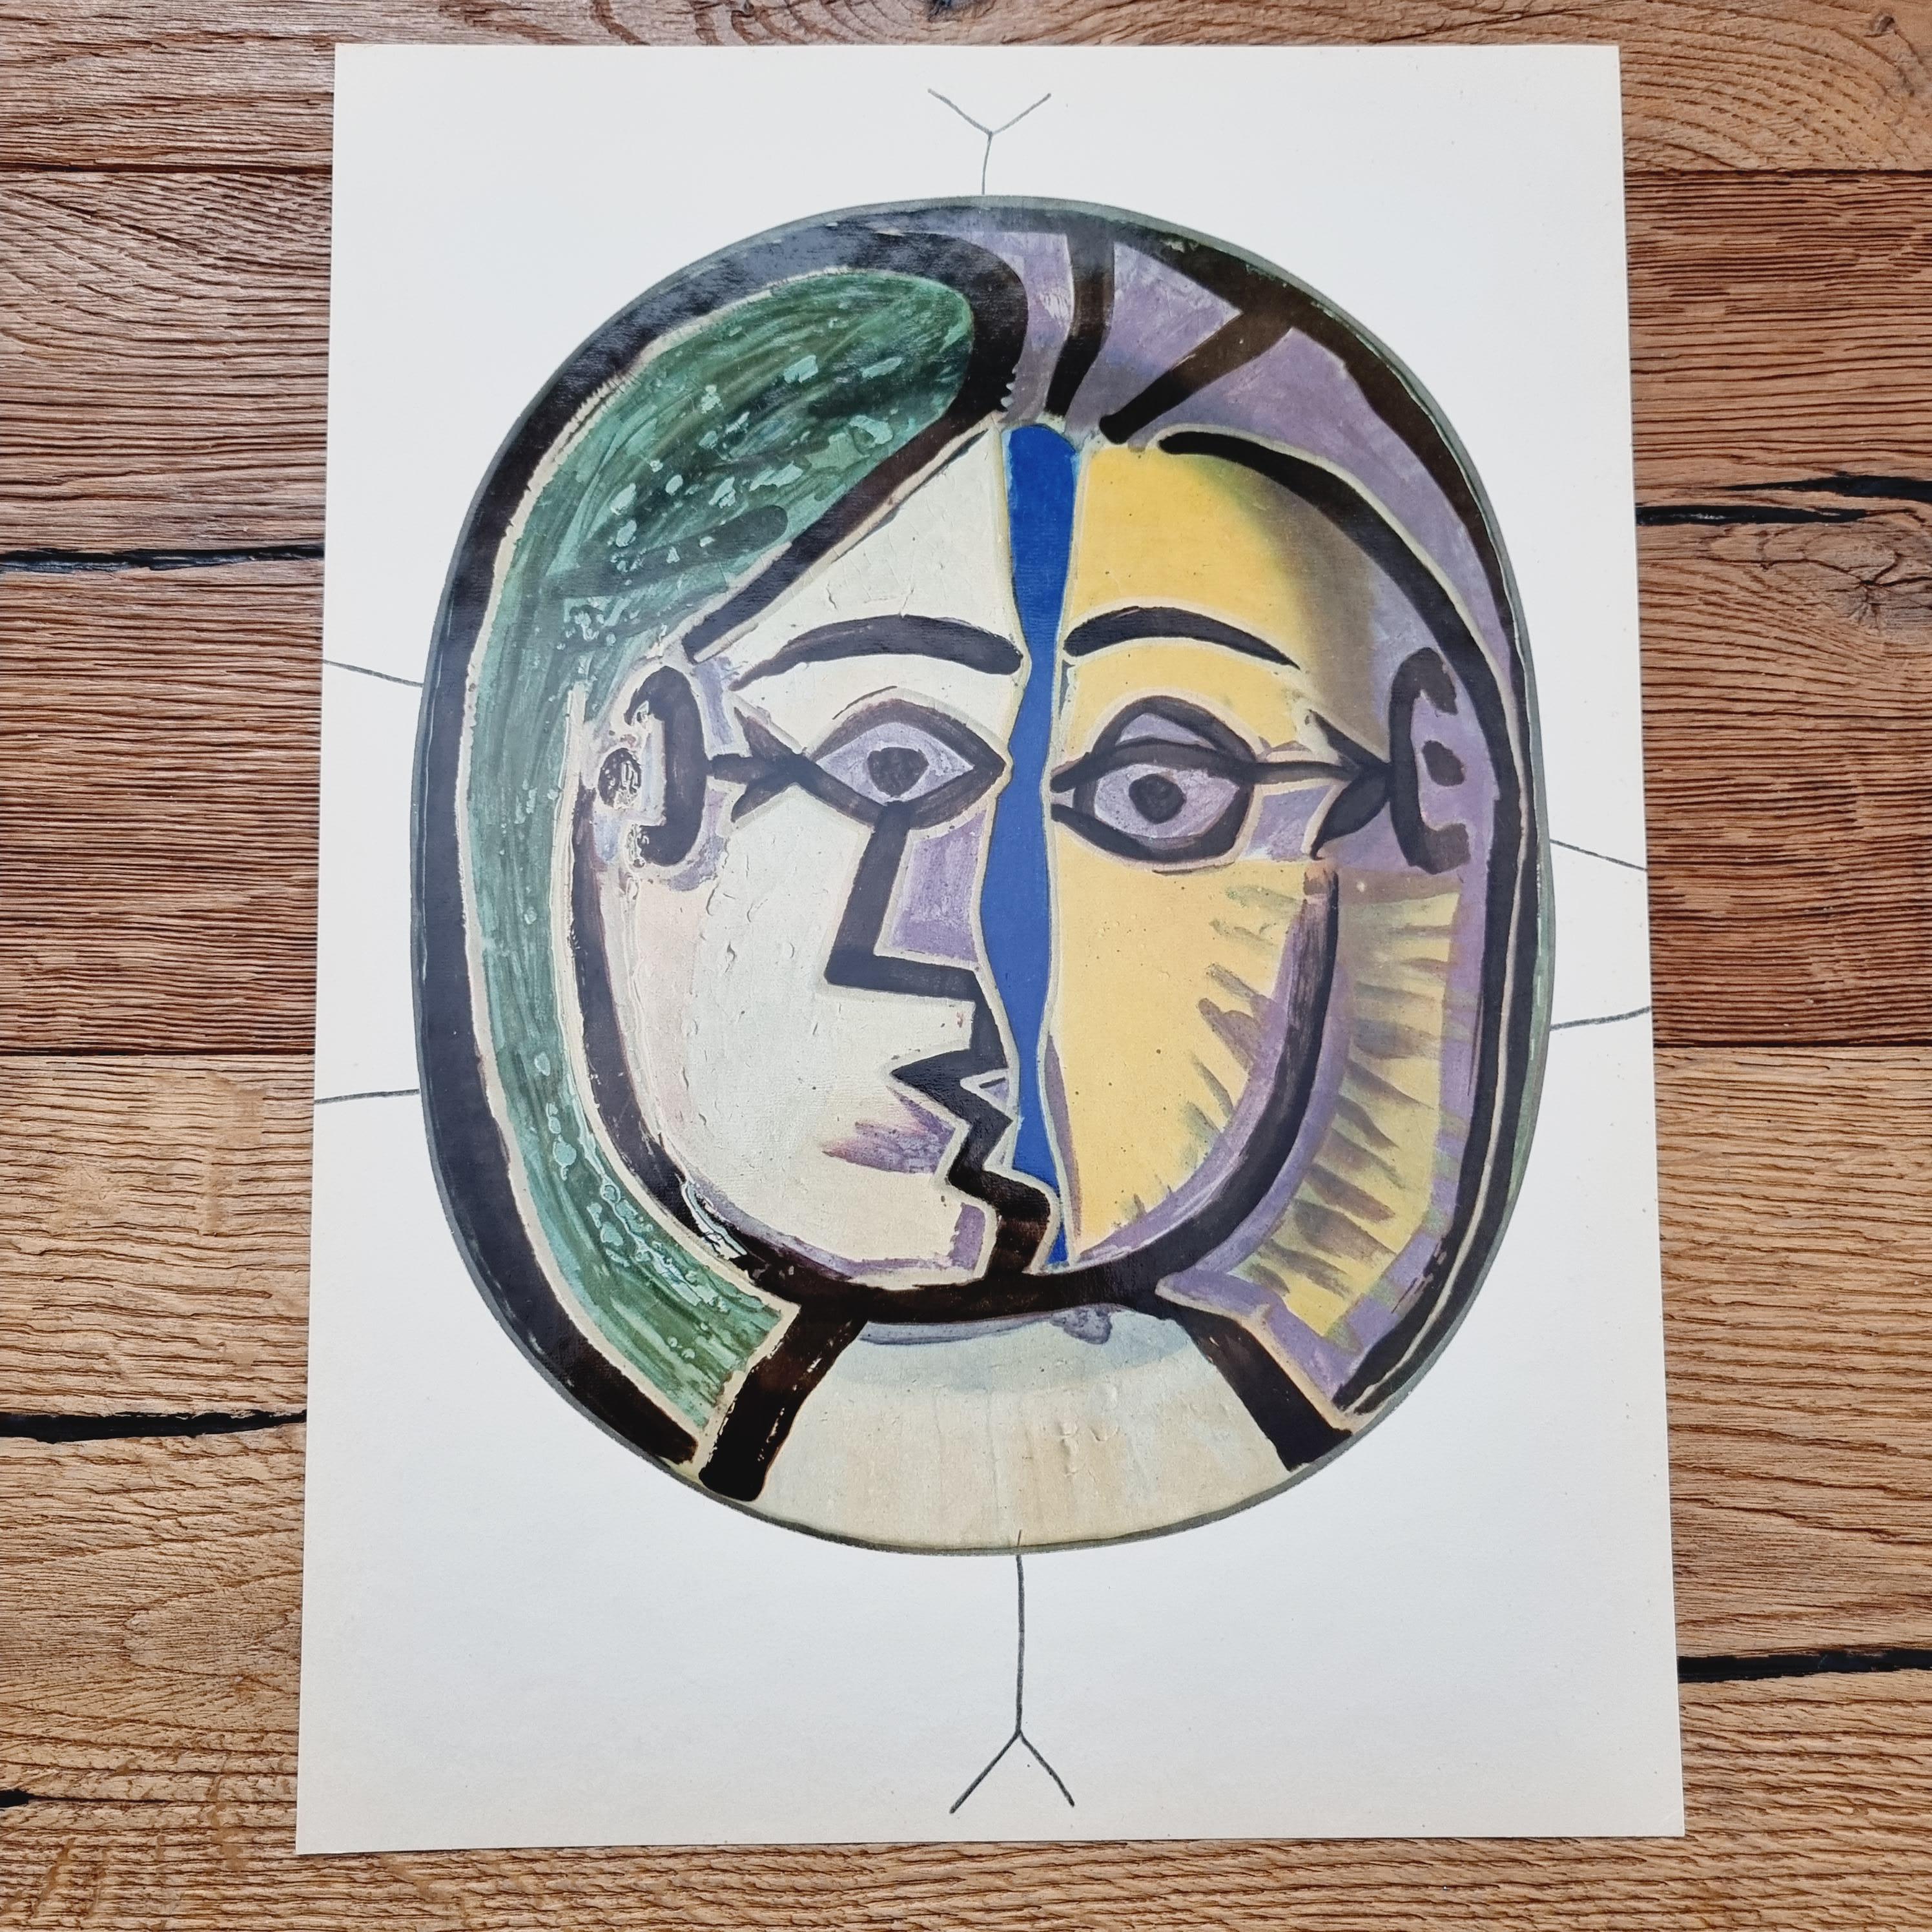 An exquisite shiny polychrome print of Picasso Vallauris ceramic plate depicting a face. The color print is attached to a thick, high quality paper with decorative lines. 

The print is originally from a Limited Edition Art Folio 